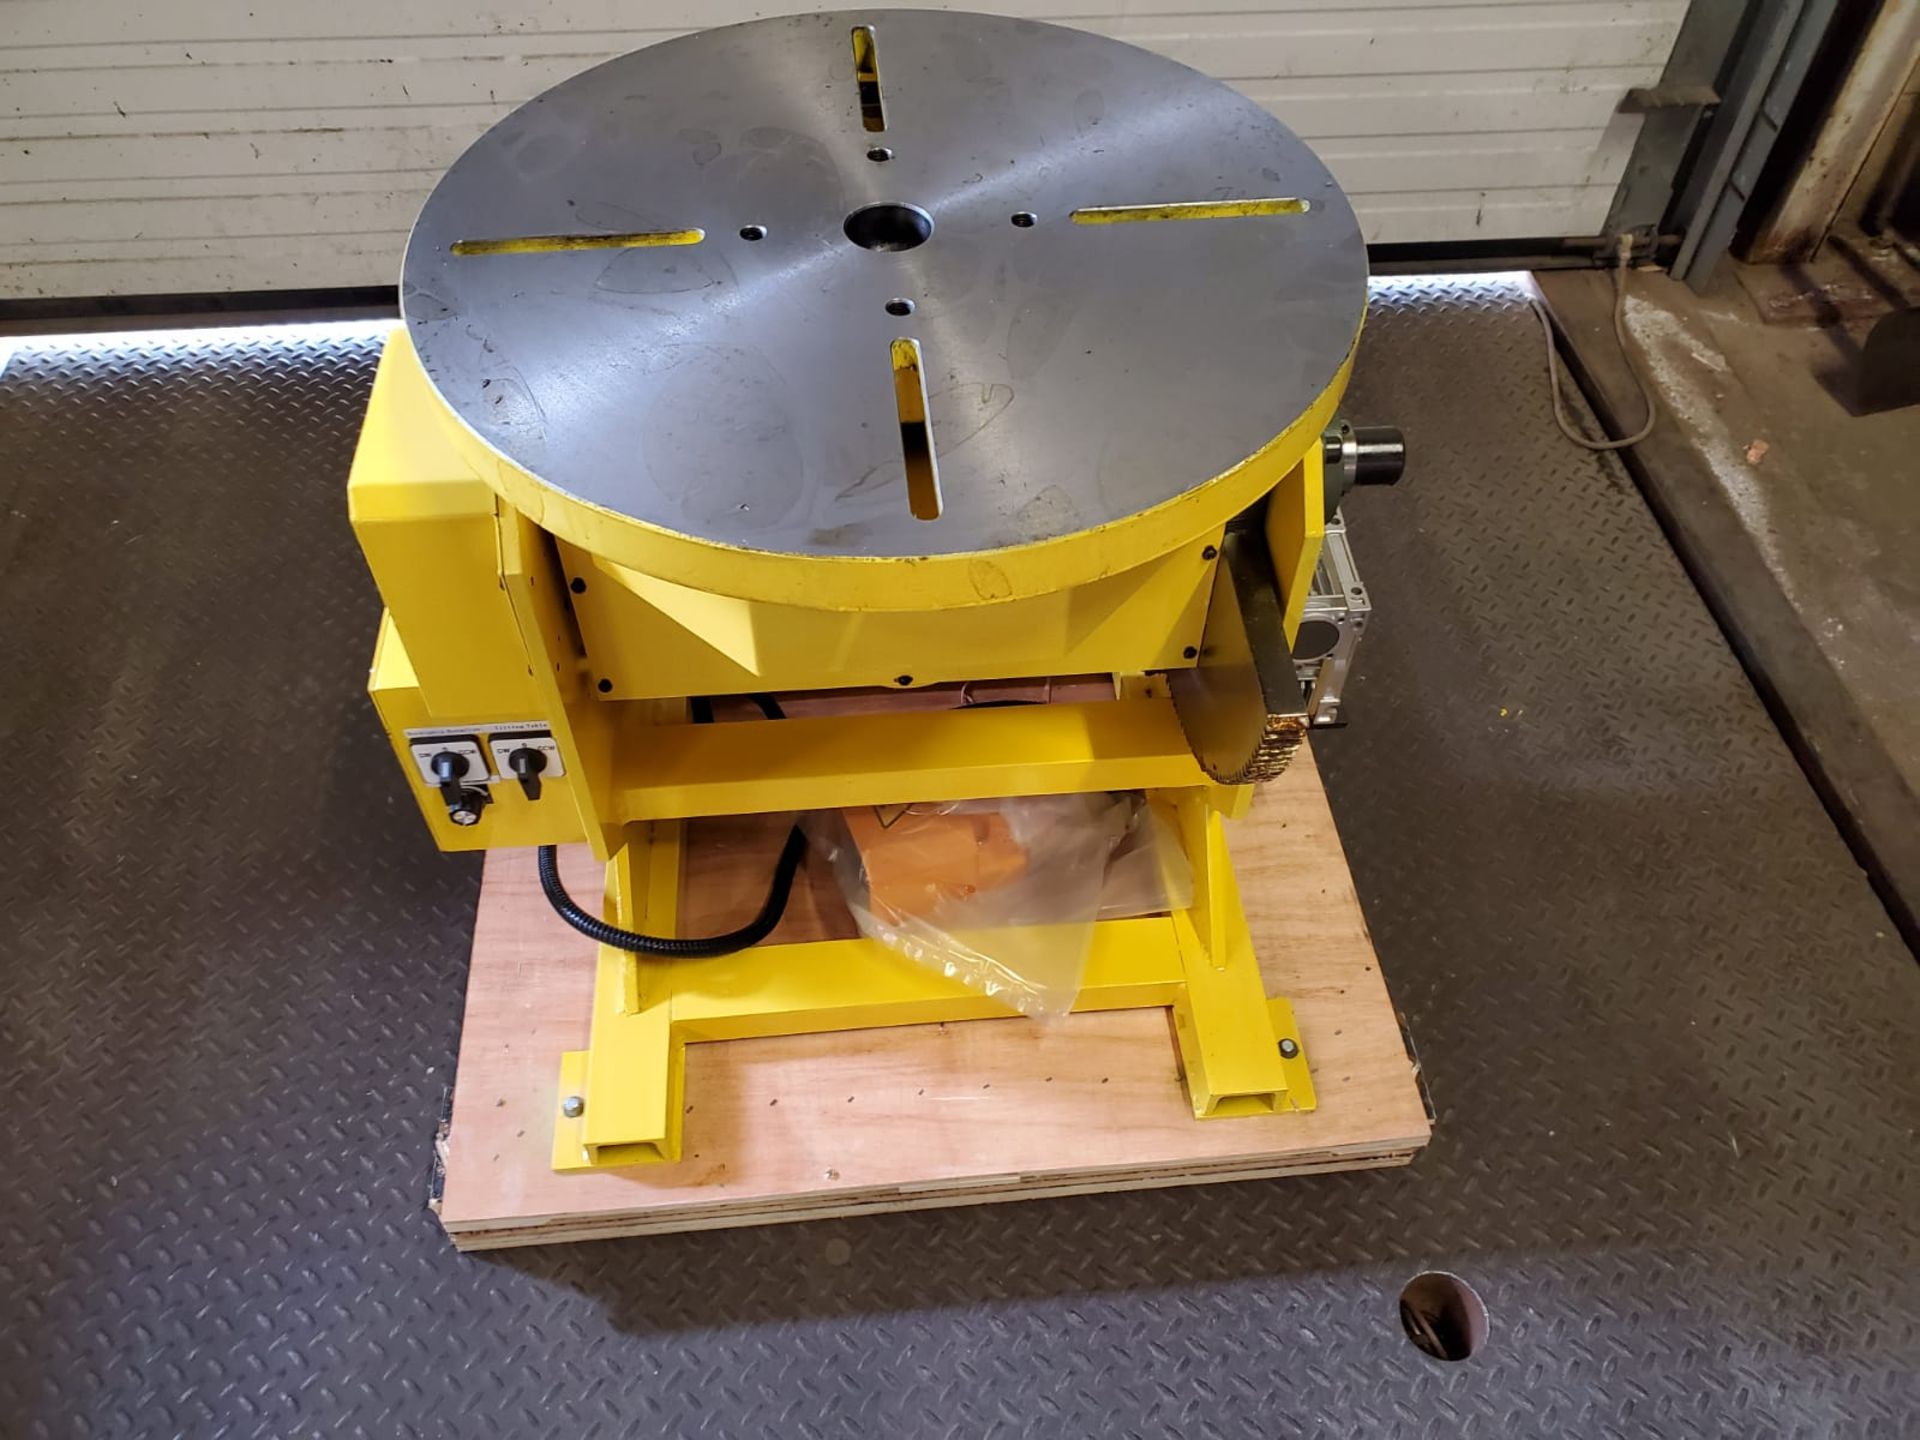 Verner model VD-1250 WELDING POSITIONER 1250lbs capacity - tilt and rotate - UNUSED AND MINT 115V - Image 2 of 4